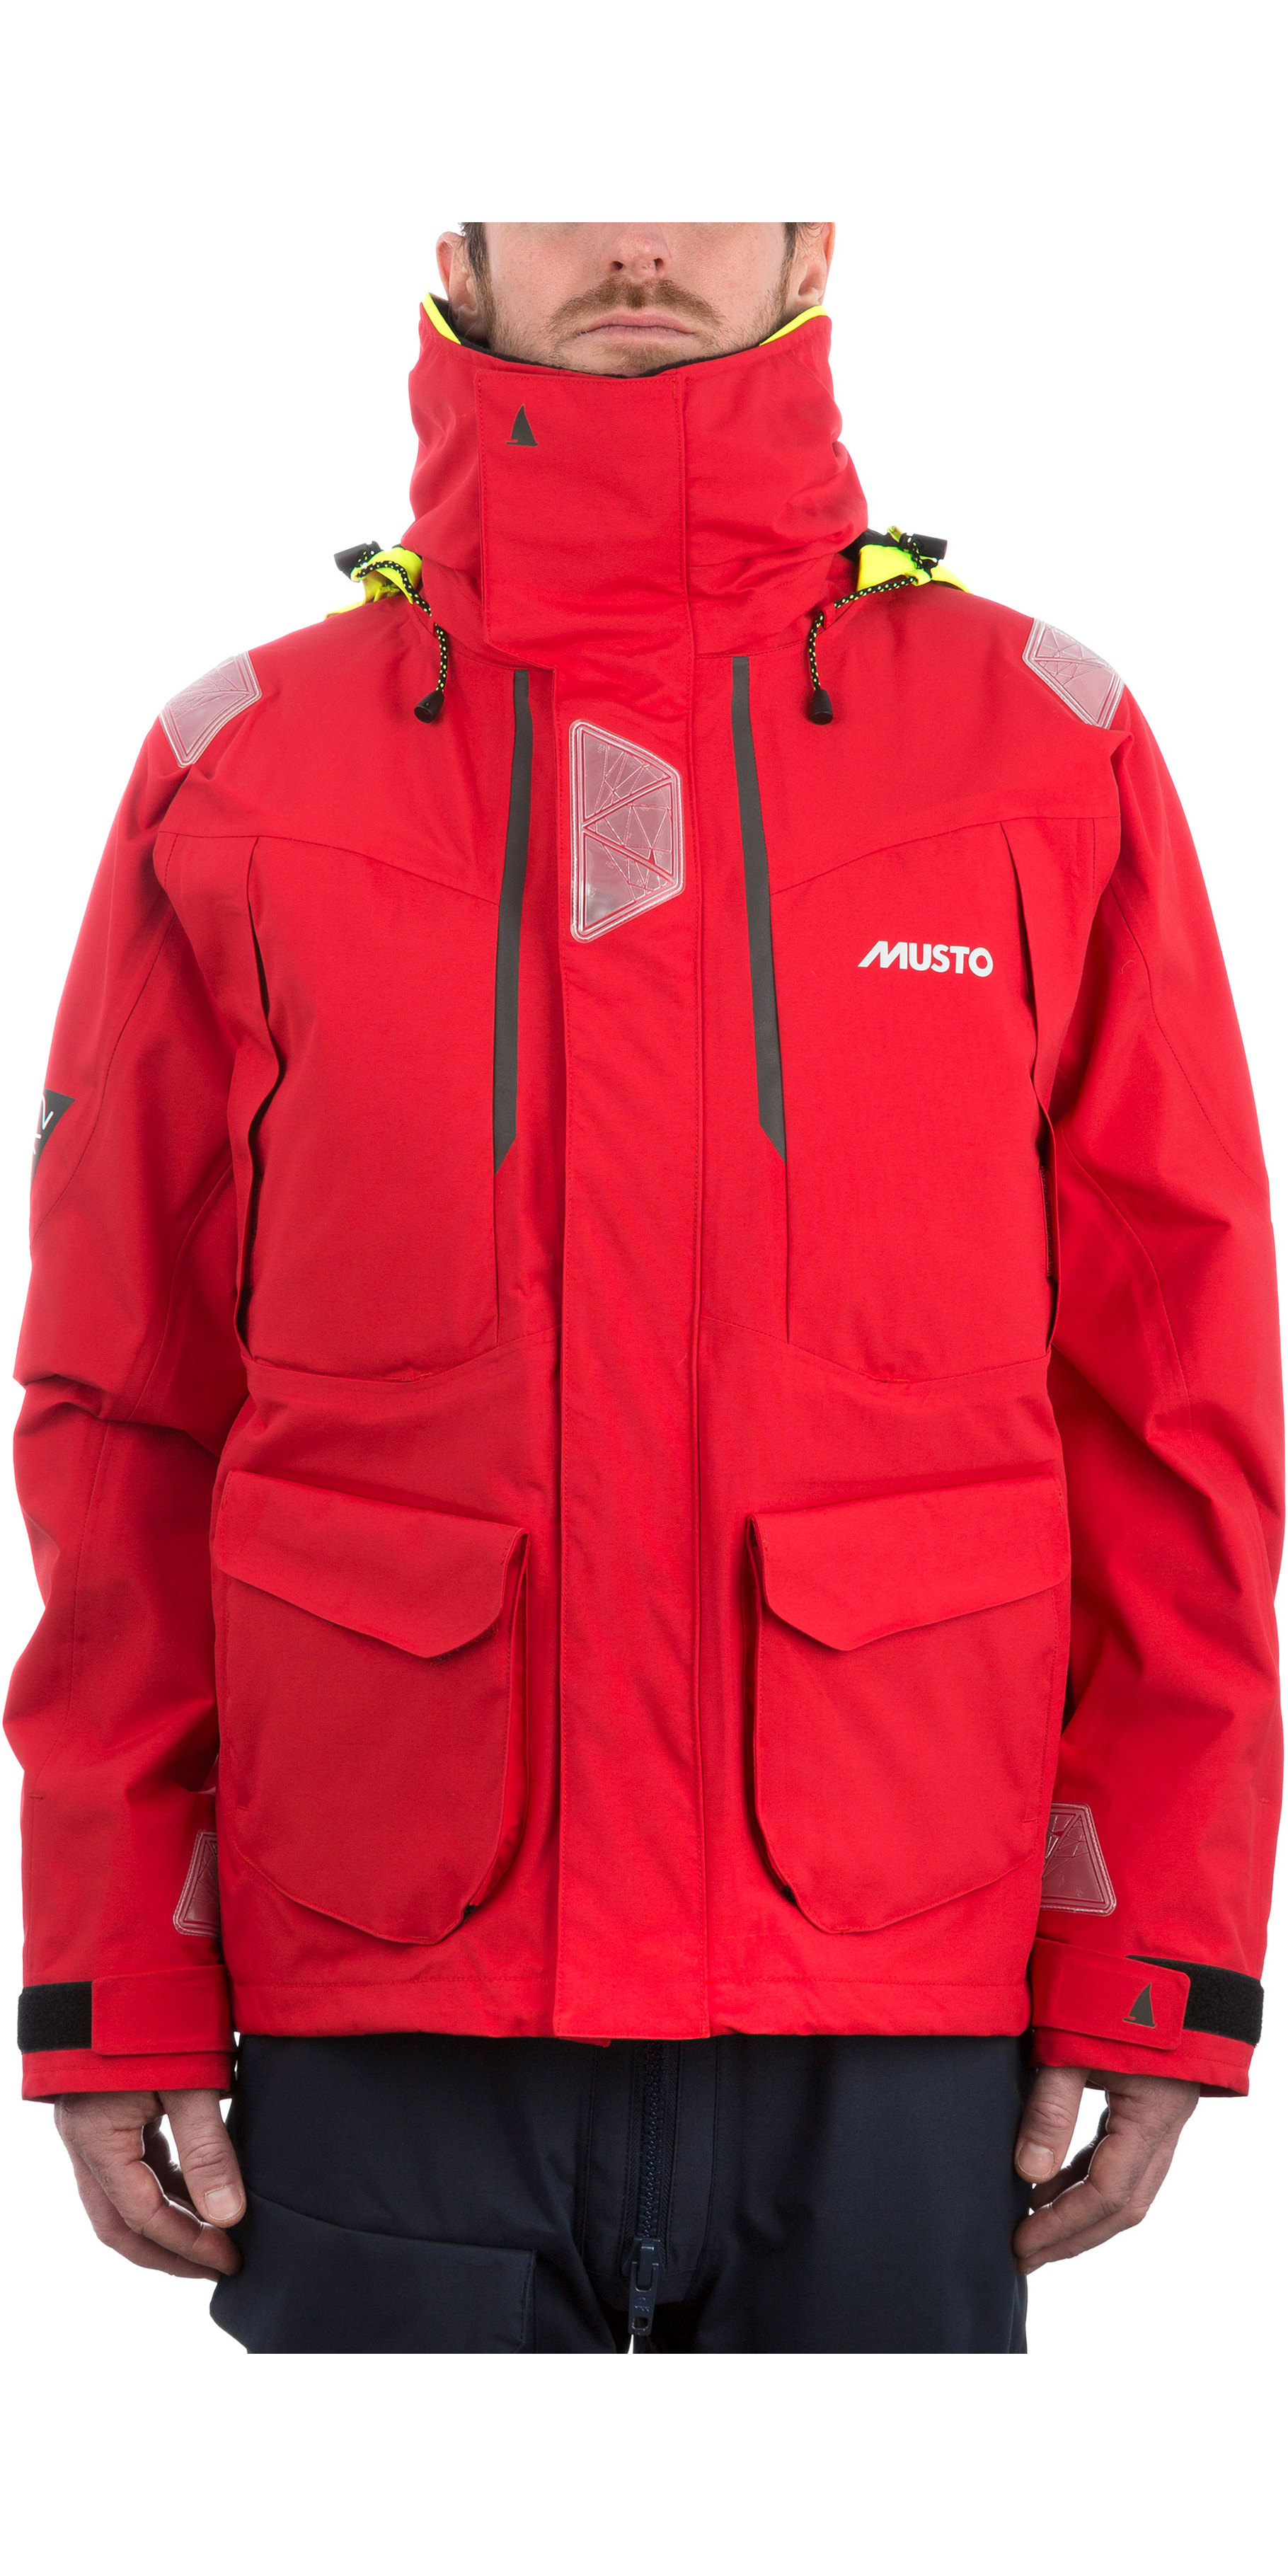 Musto BR2 Mens Offshore Waterproof Windproof and Breathable Sailing Jacket SMJK052